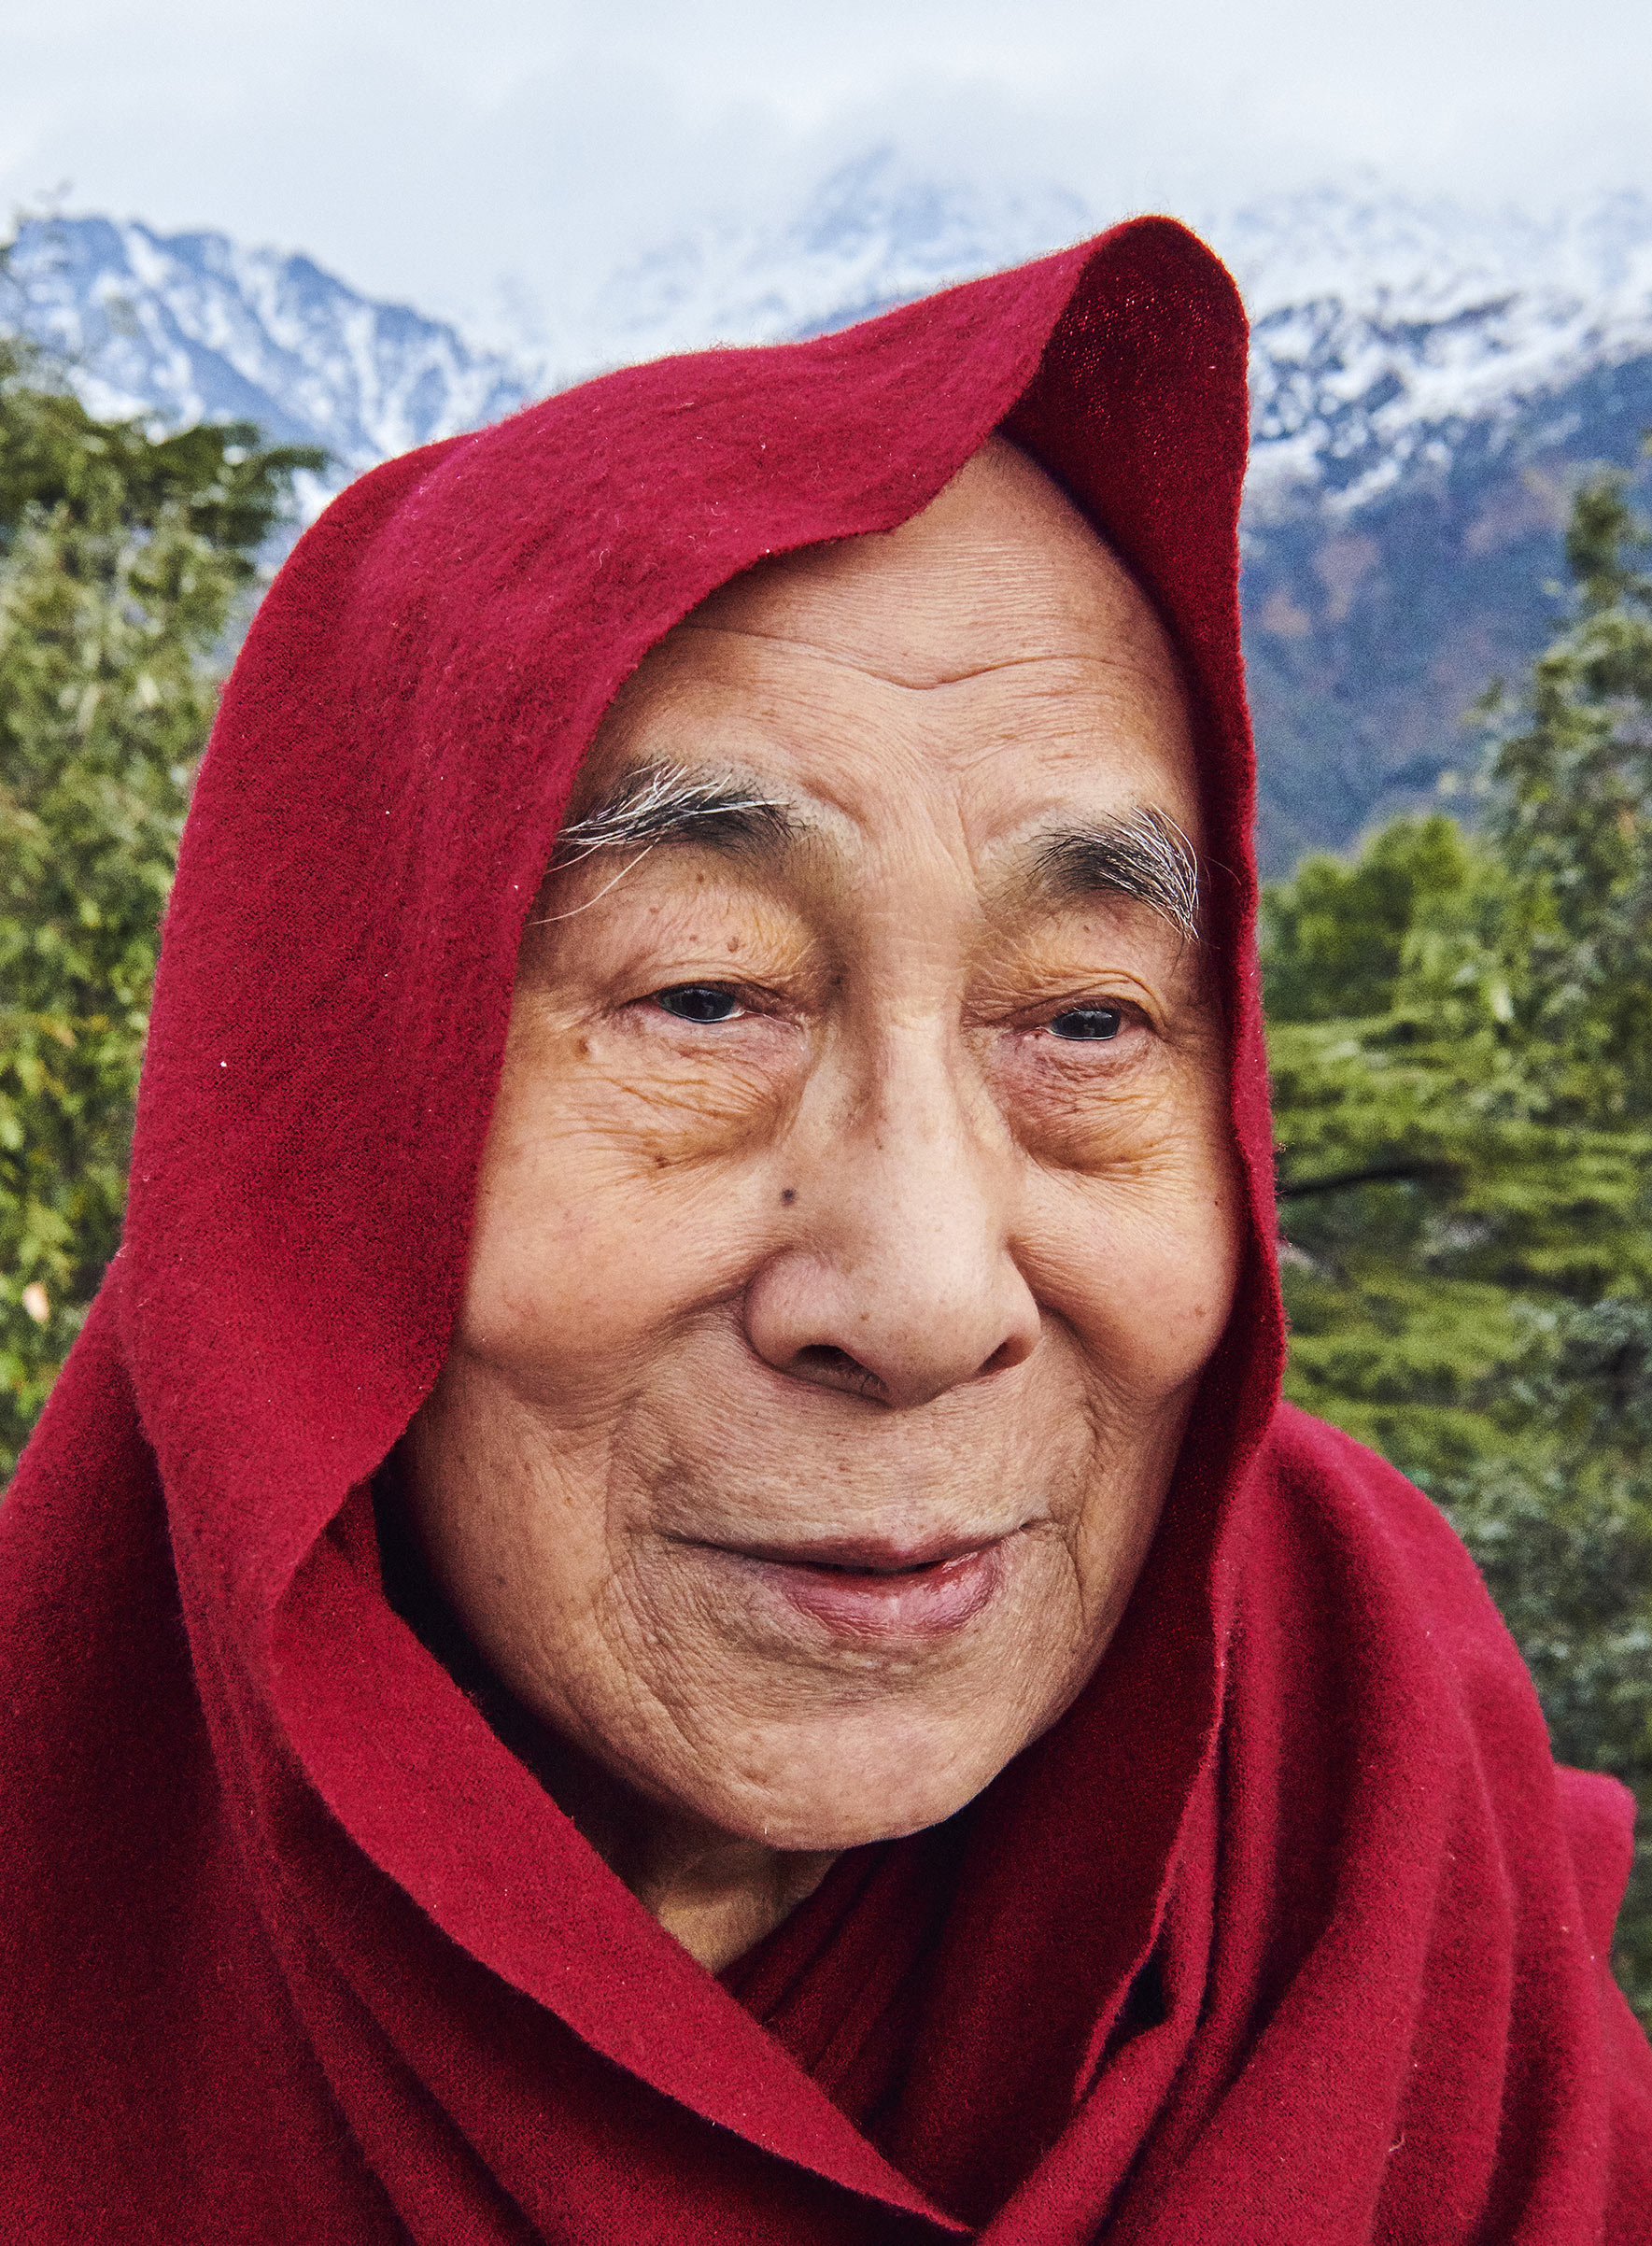 Dalai Lama. "The Survivor," March 18 issue. (Ruven Afanador for TIME)